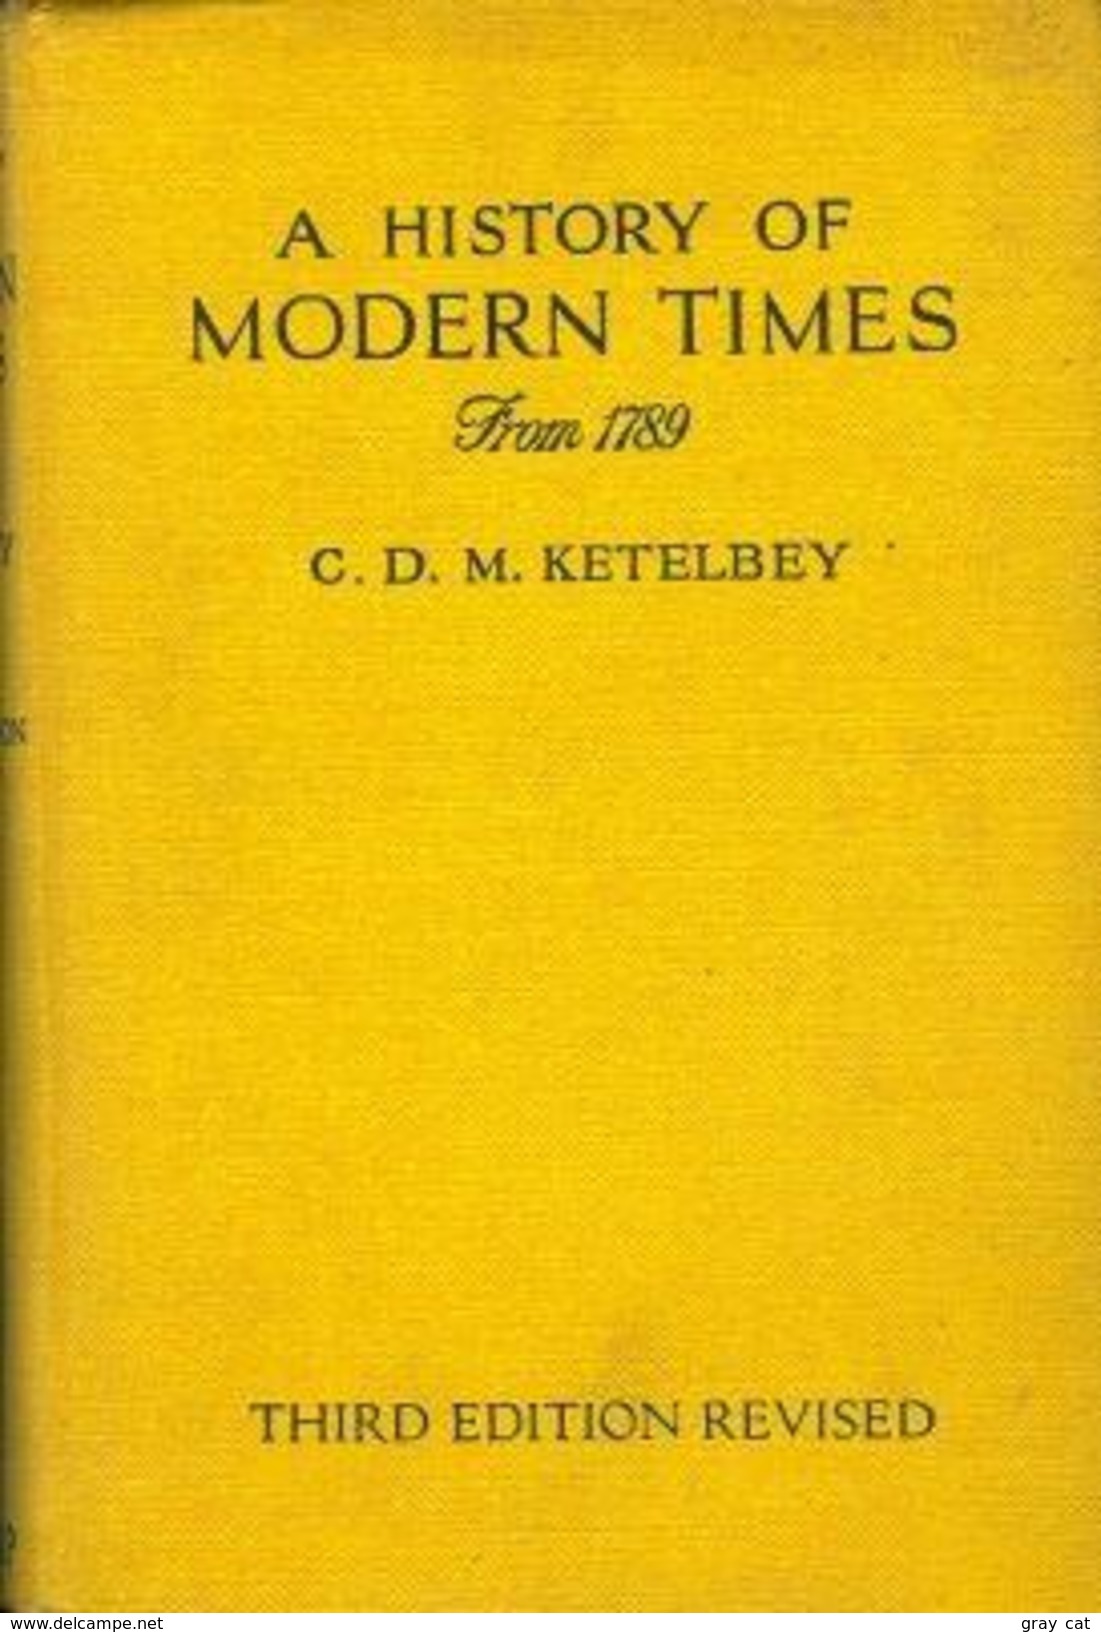 A History Of Modern Times From 1789 (Third Edition) By C. D. M. Ketelbey - Monde